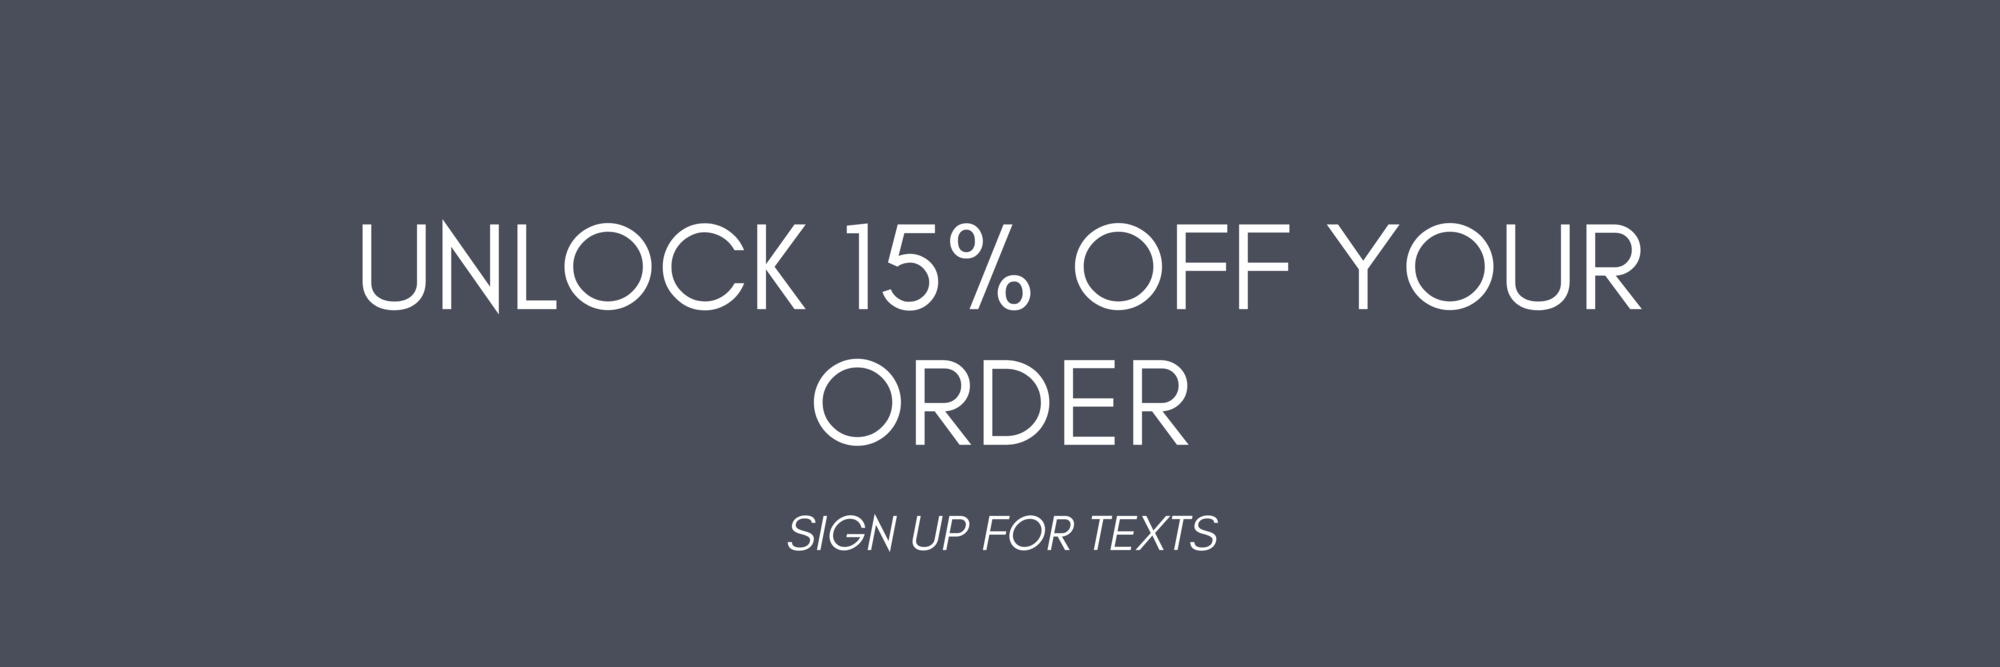 Sign Up for Texts to get 15% Off your Order